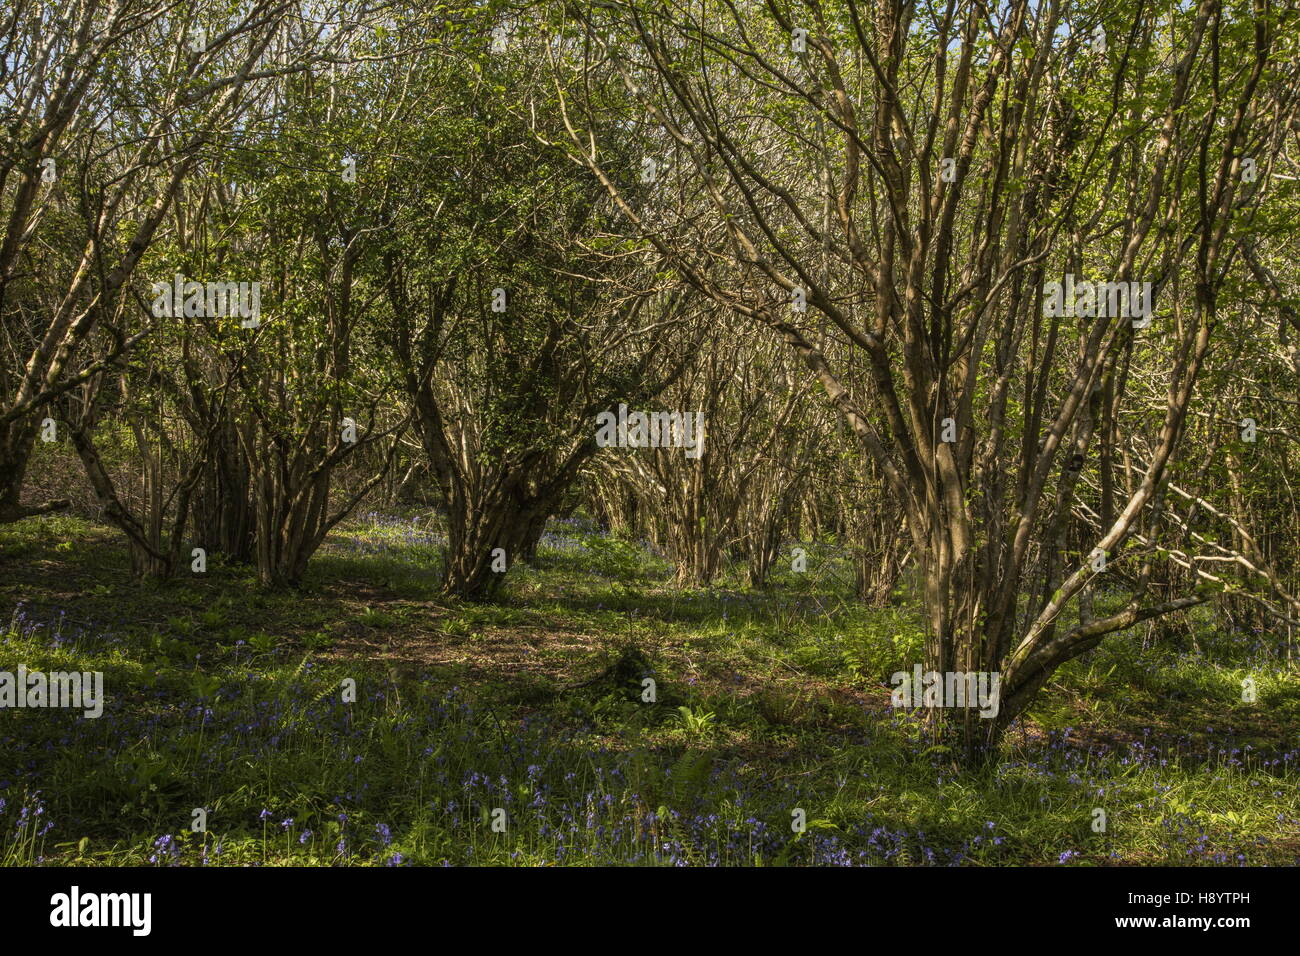 Ancient hazel coppice in spring, near Penmaen, Gower Peninsula, South Wales. Stock Photo